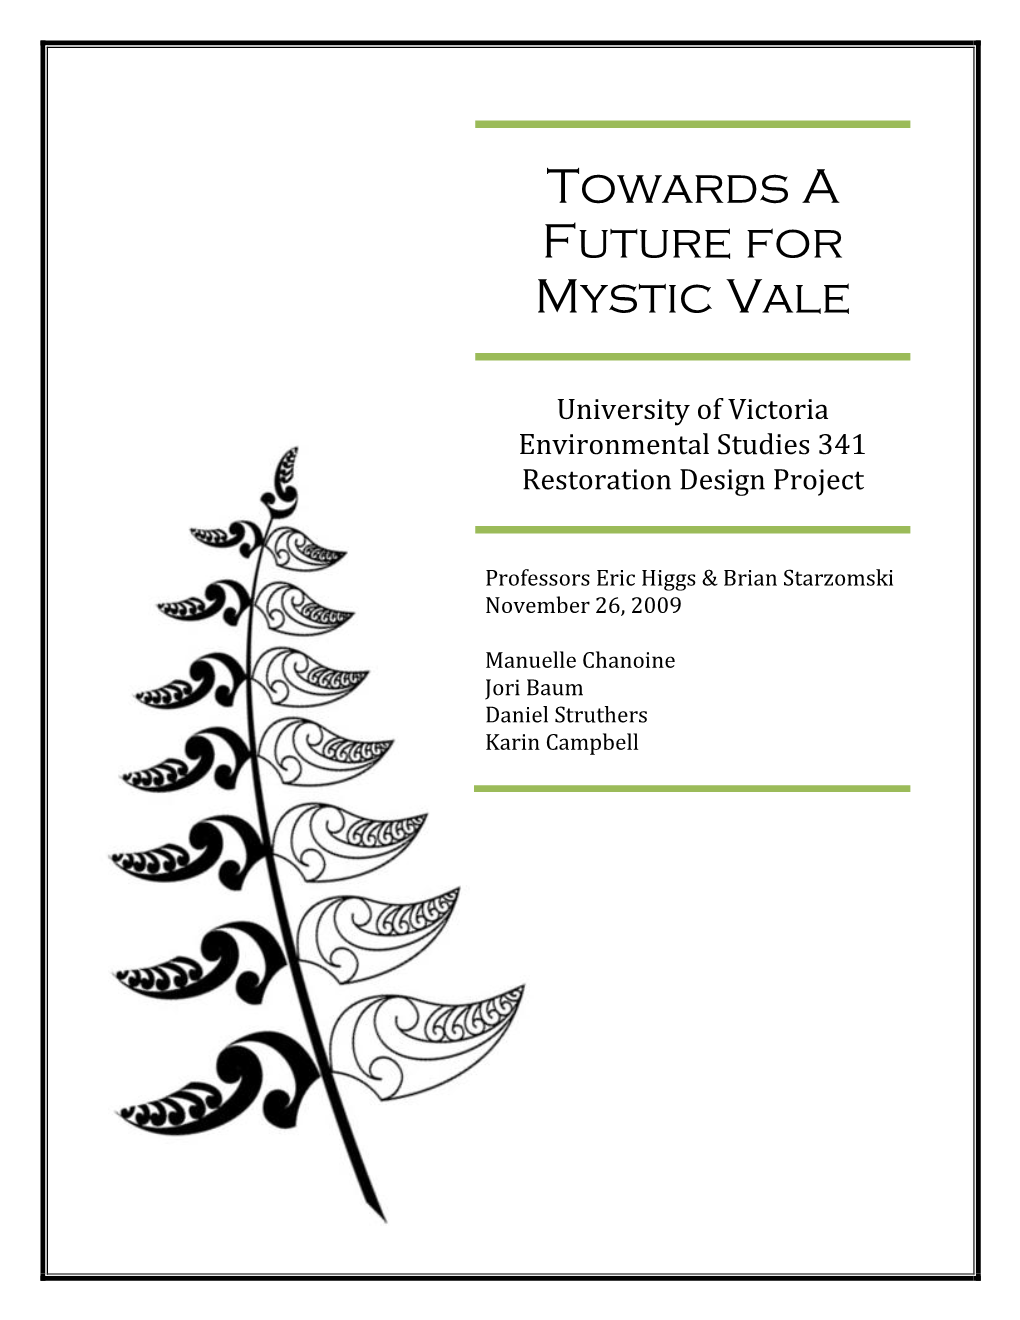 Towards the Future of Mystic Vale